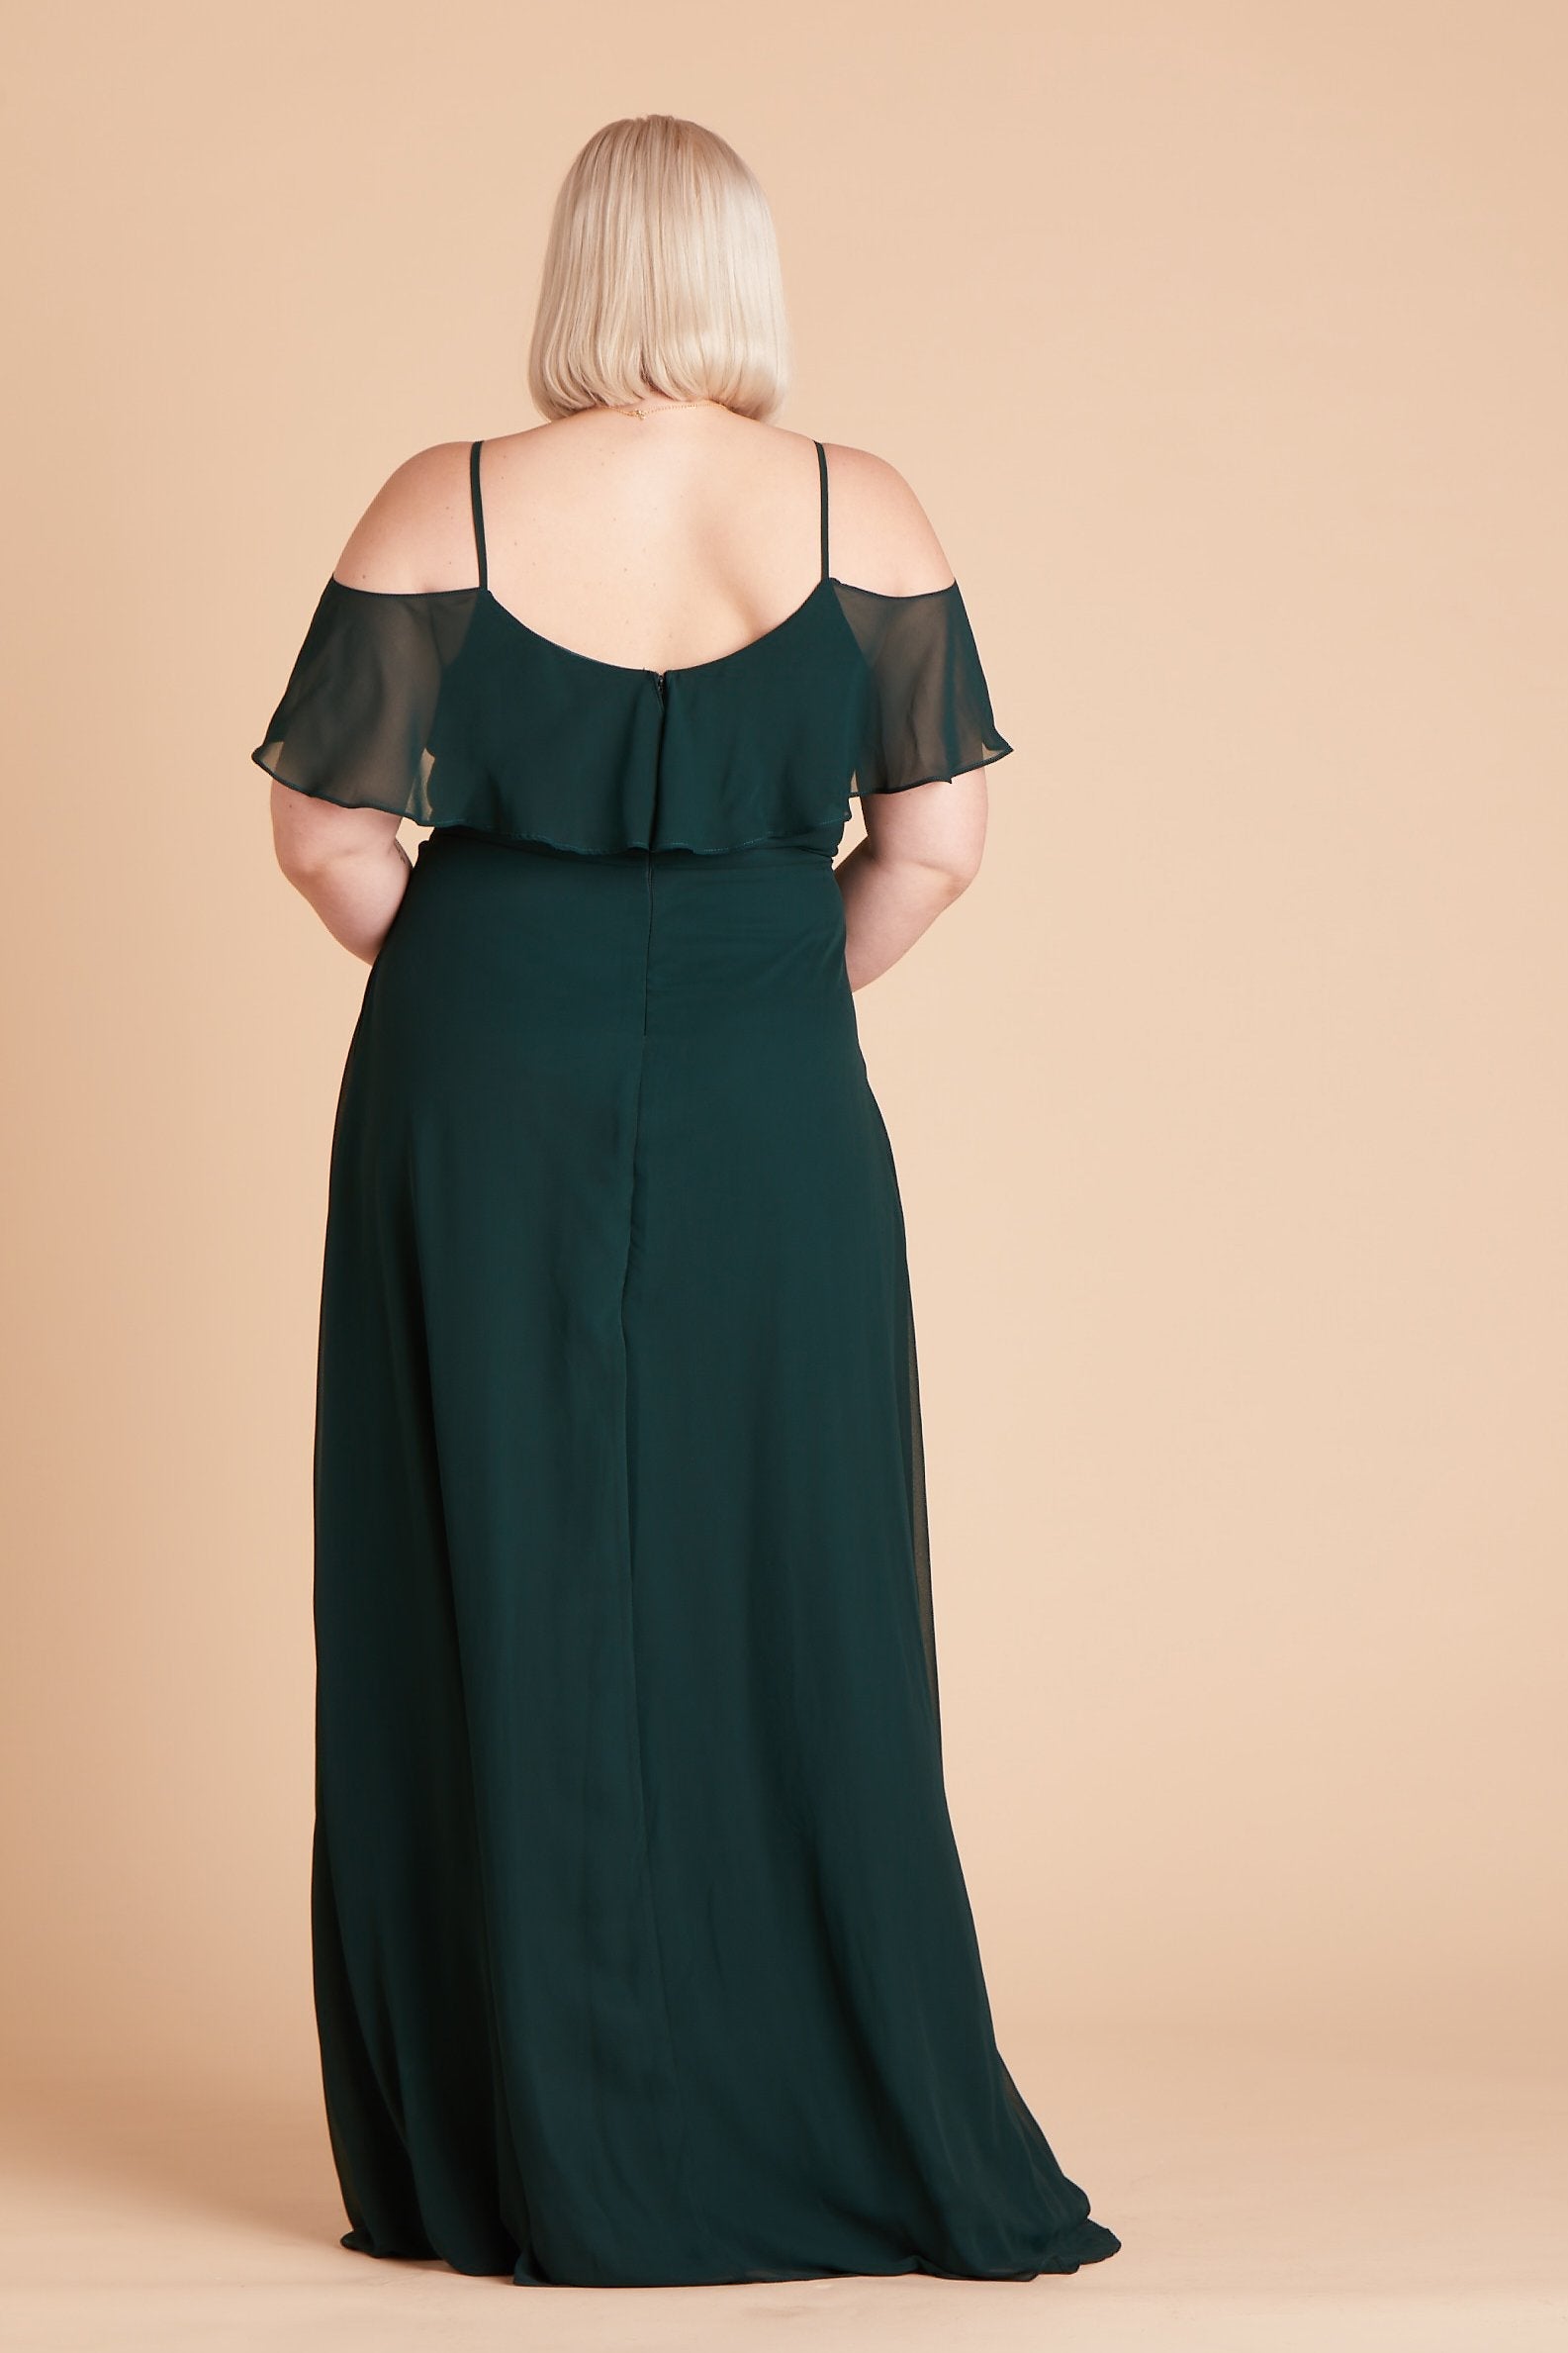 Jane convertible plus size bridesmaid dress in emerald green chiffon by Birdy Grey, back view